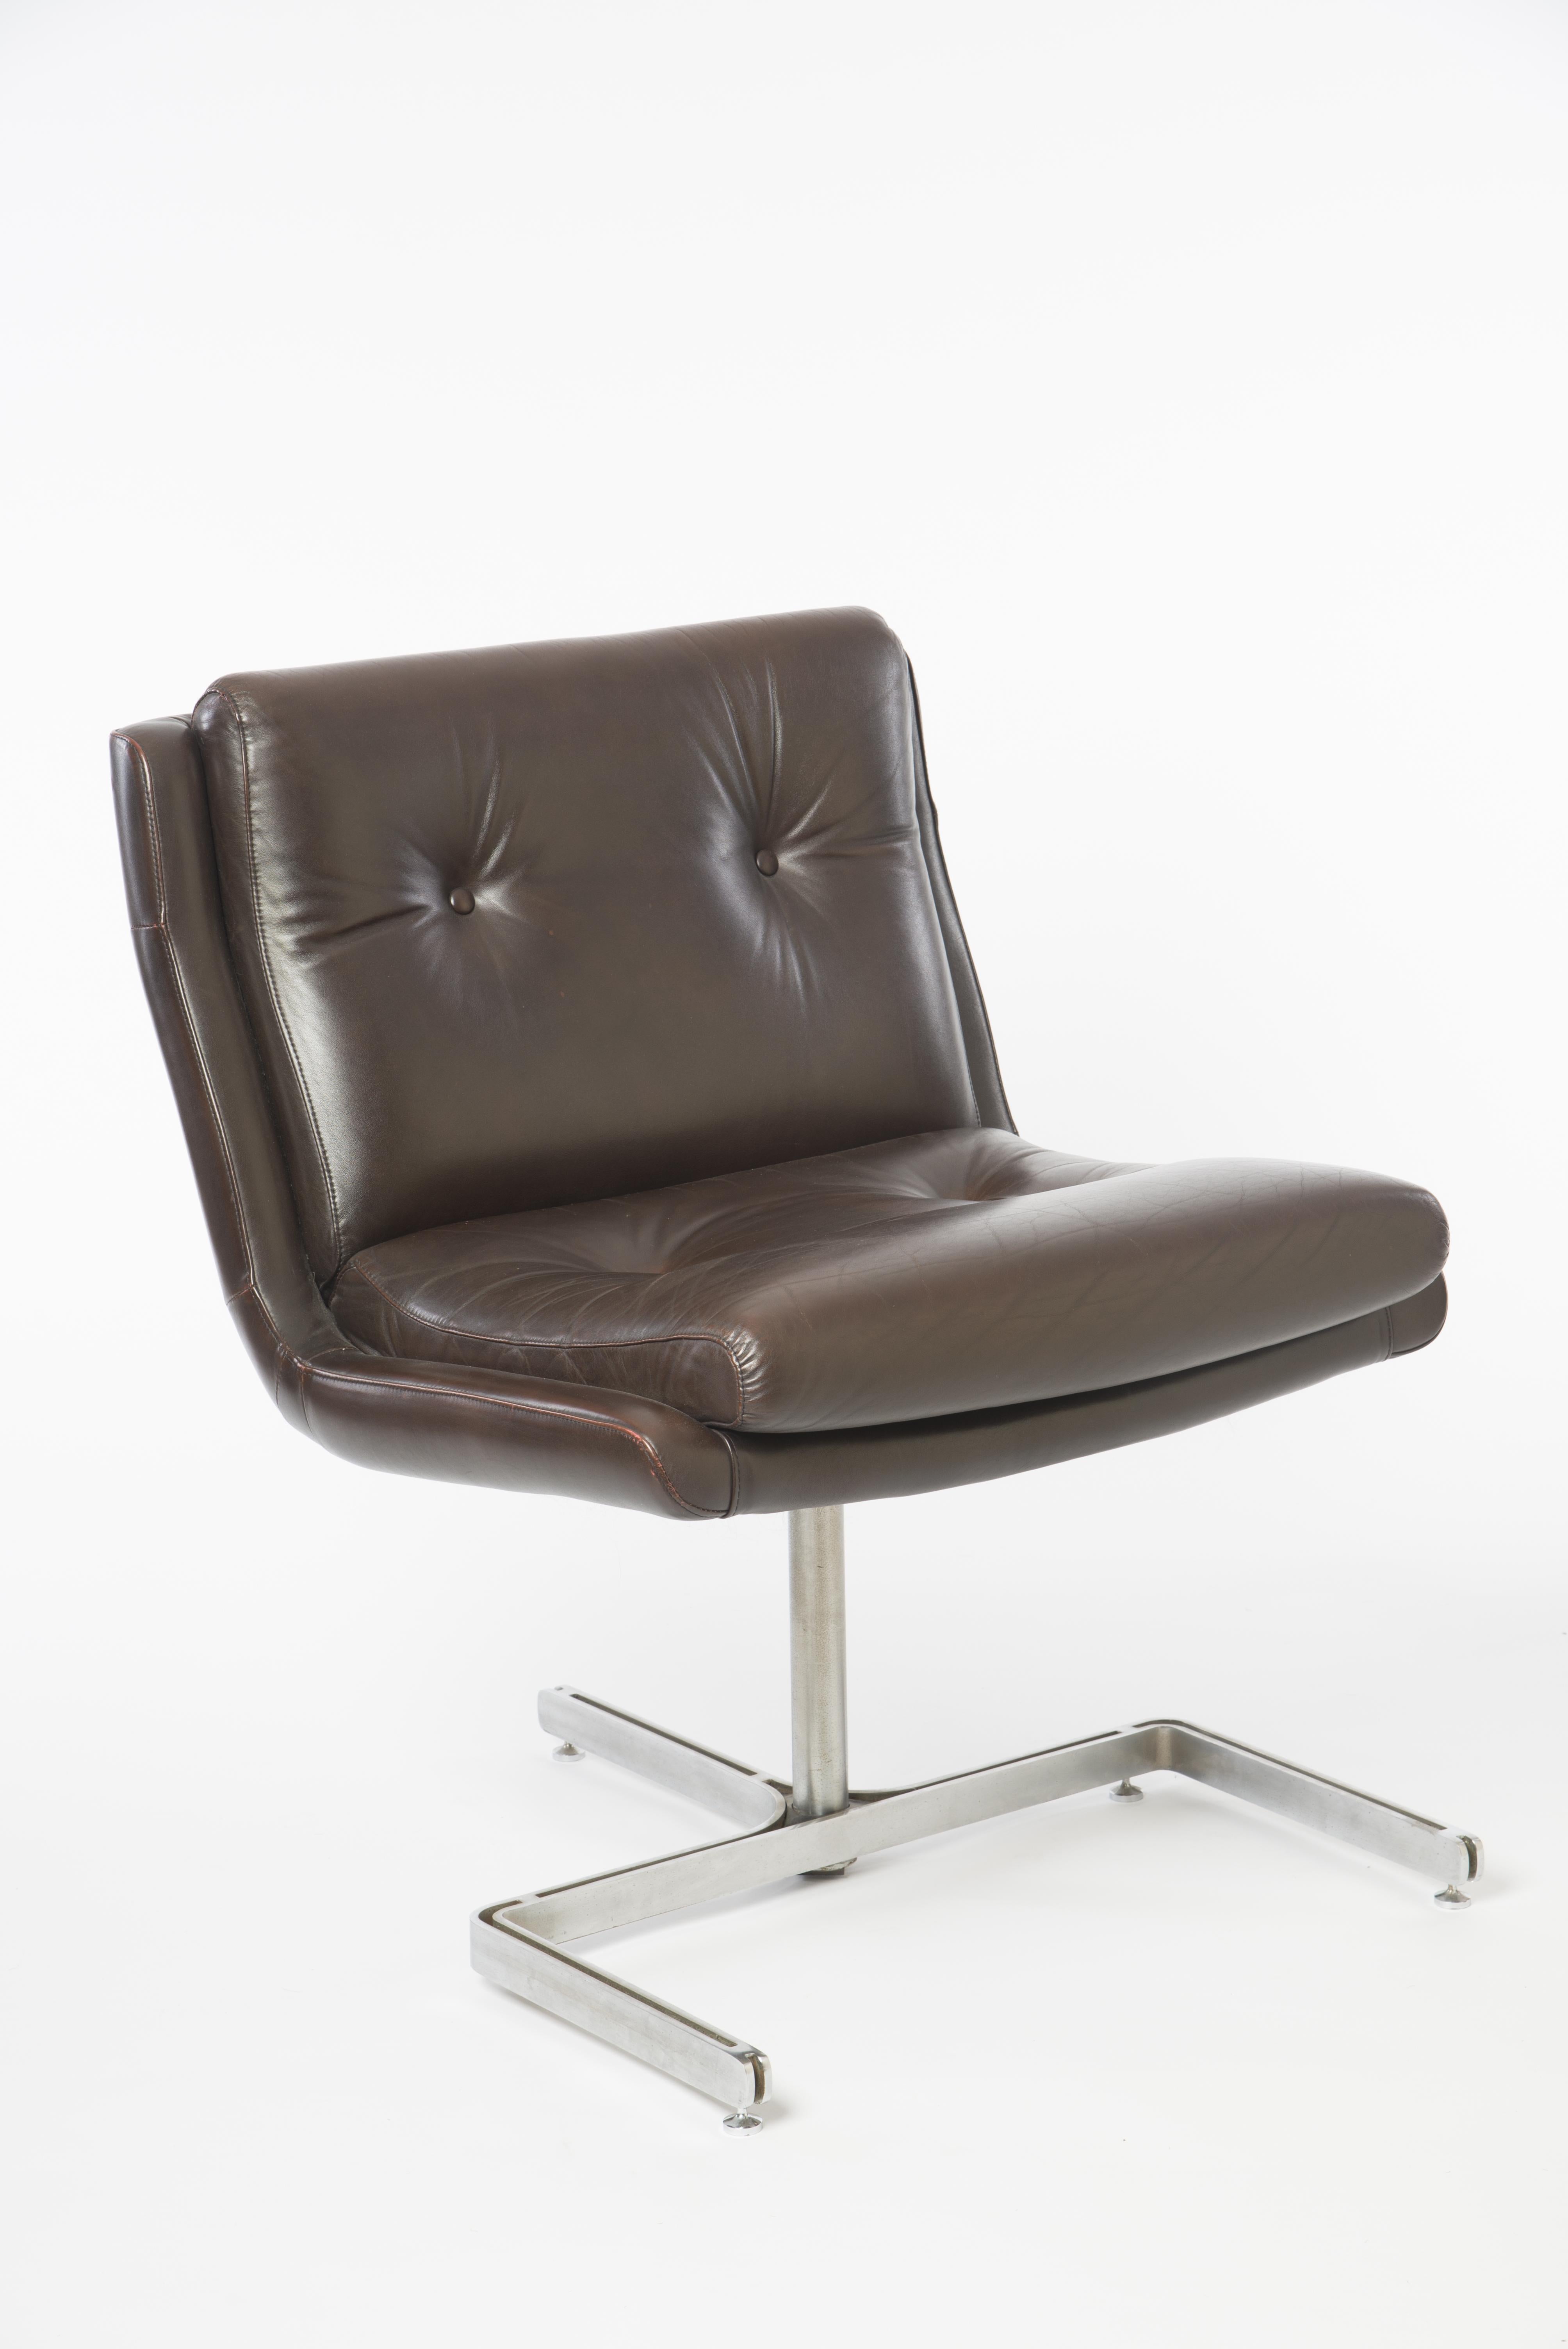 This beautiful pair of easy chairs by Raphael Raffel were initially made for the interior of the executive office of the P.T.T. Telecom France in 1973.
The combination of leather, steel, and clean lines give these chairs their exceptional